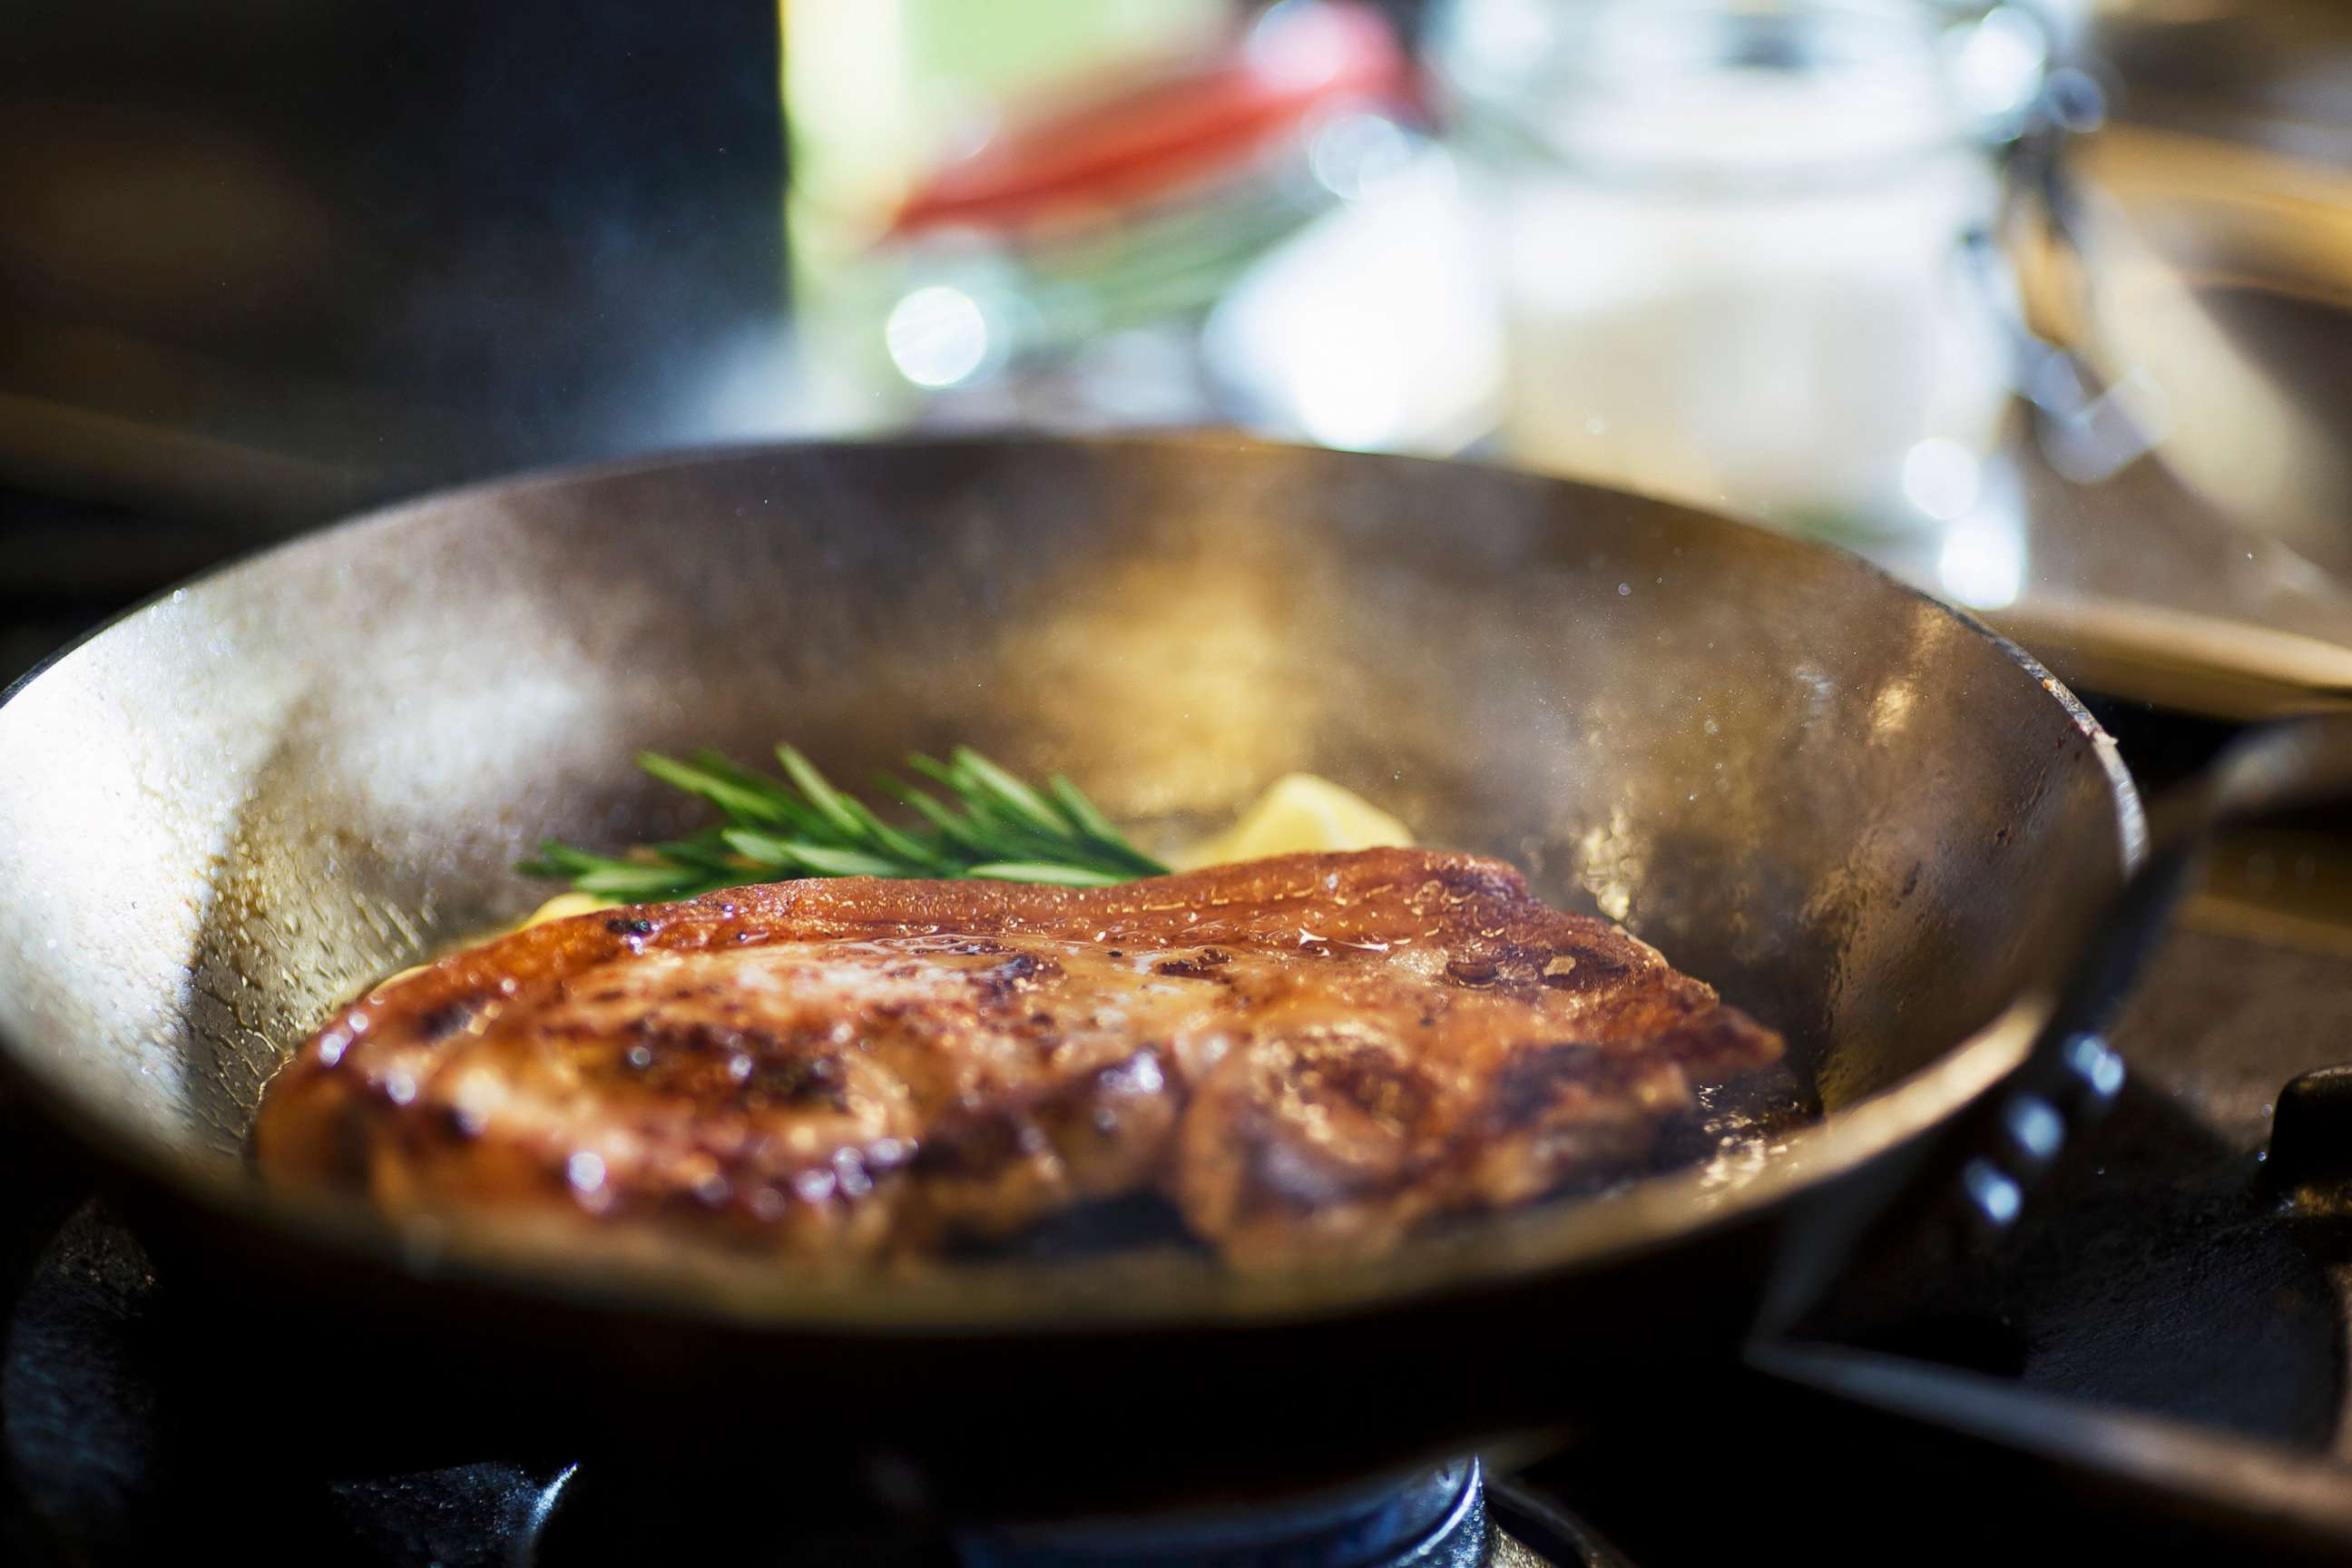 PHOTO: Steak cooking in a skillet with butter and herbs.